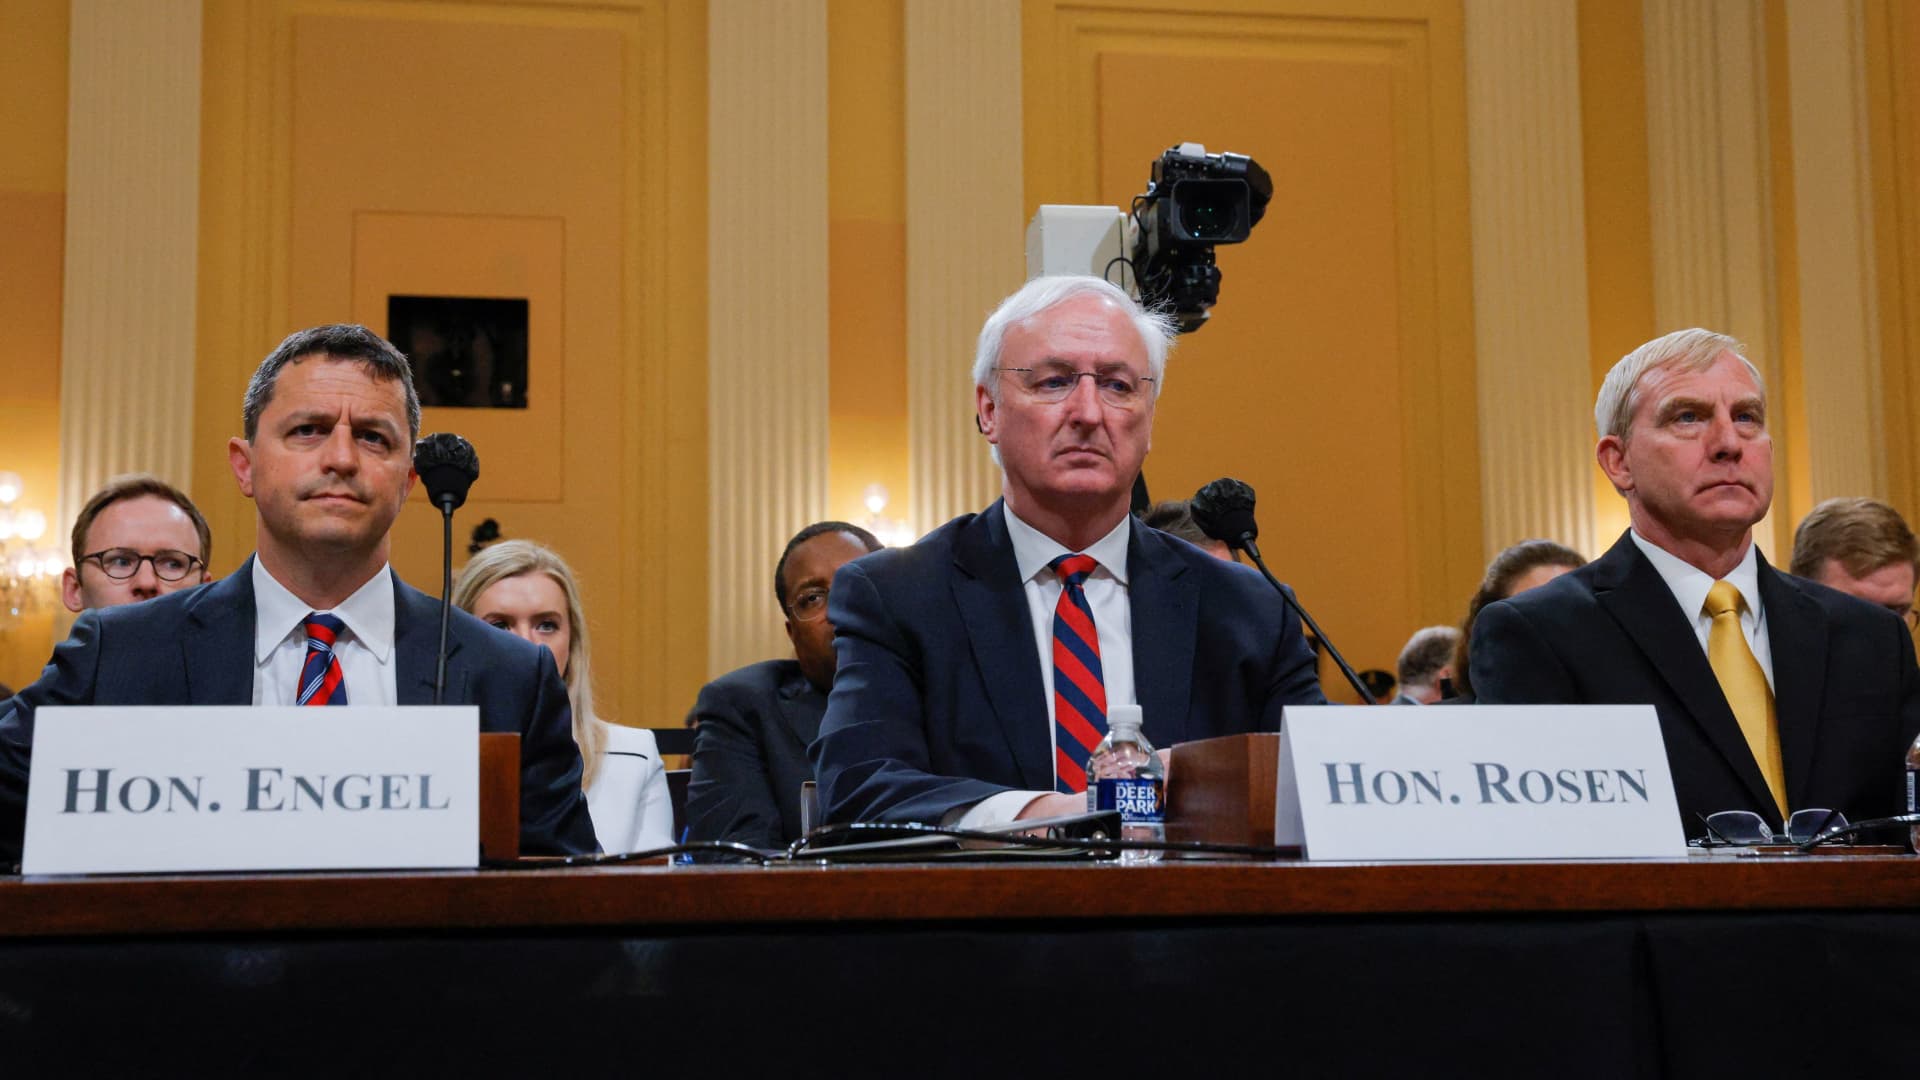 Former Assistant Attorney General for the Office of Legal Counsel Steven Engel, former Acting Attorney General Jeffrey Rosen and former Acting Deputy Attorney General Richard Donoghue attend the fifth public hearing of the U.S. House Select Committee to Investigate the January 6 Attack on the United States Capitol, on Capitol Hill in Washington, U.S., June 23, 2022.